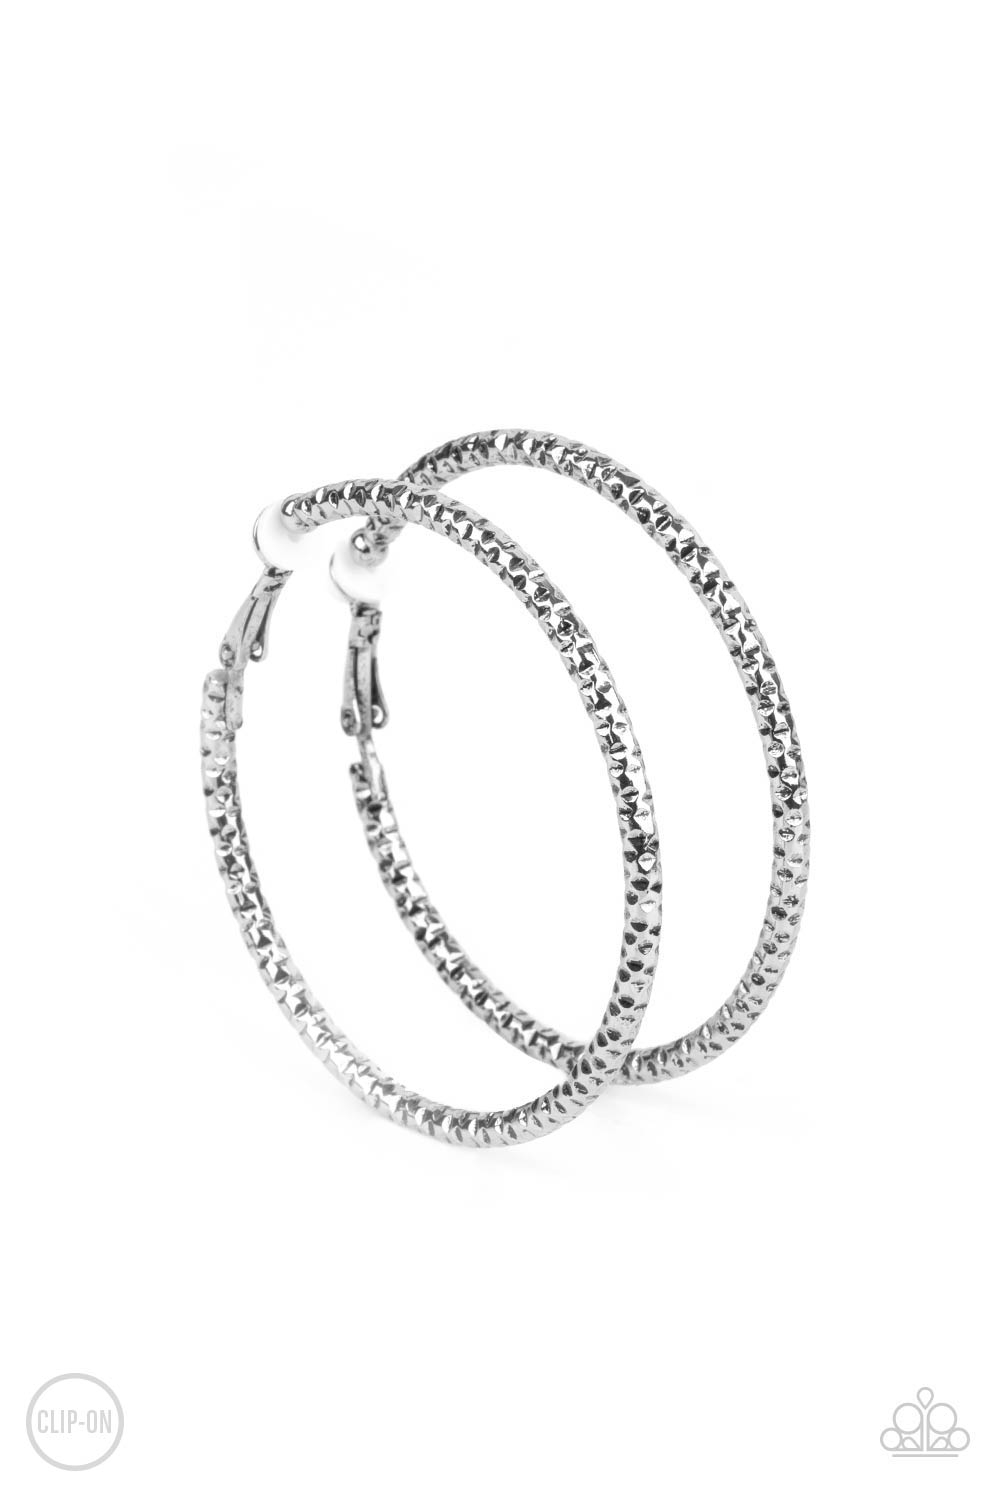 Subtly Sassy Paparazzi Accessories Necklace with Clip On Hoops Silver